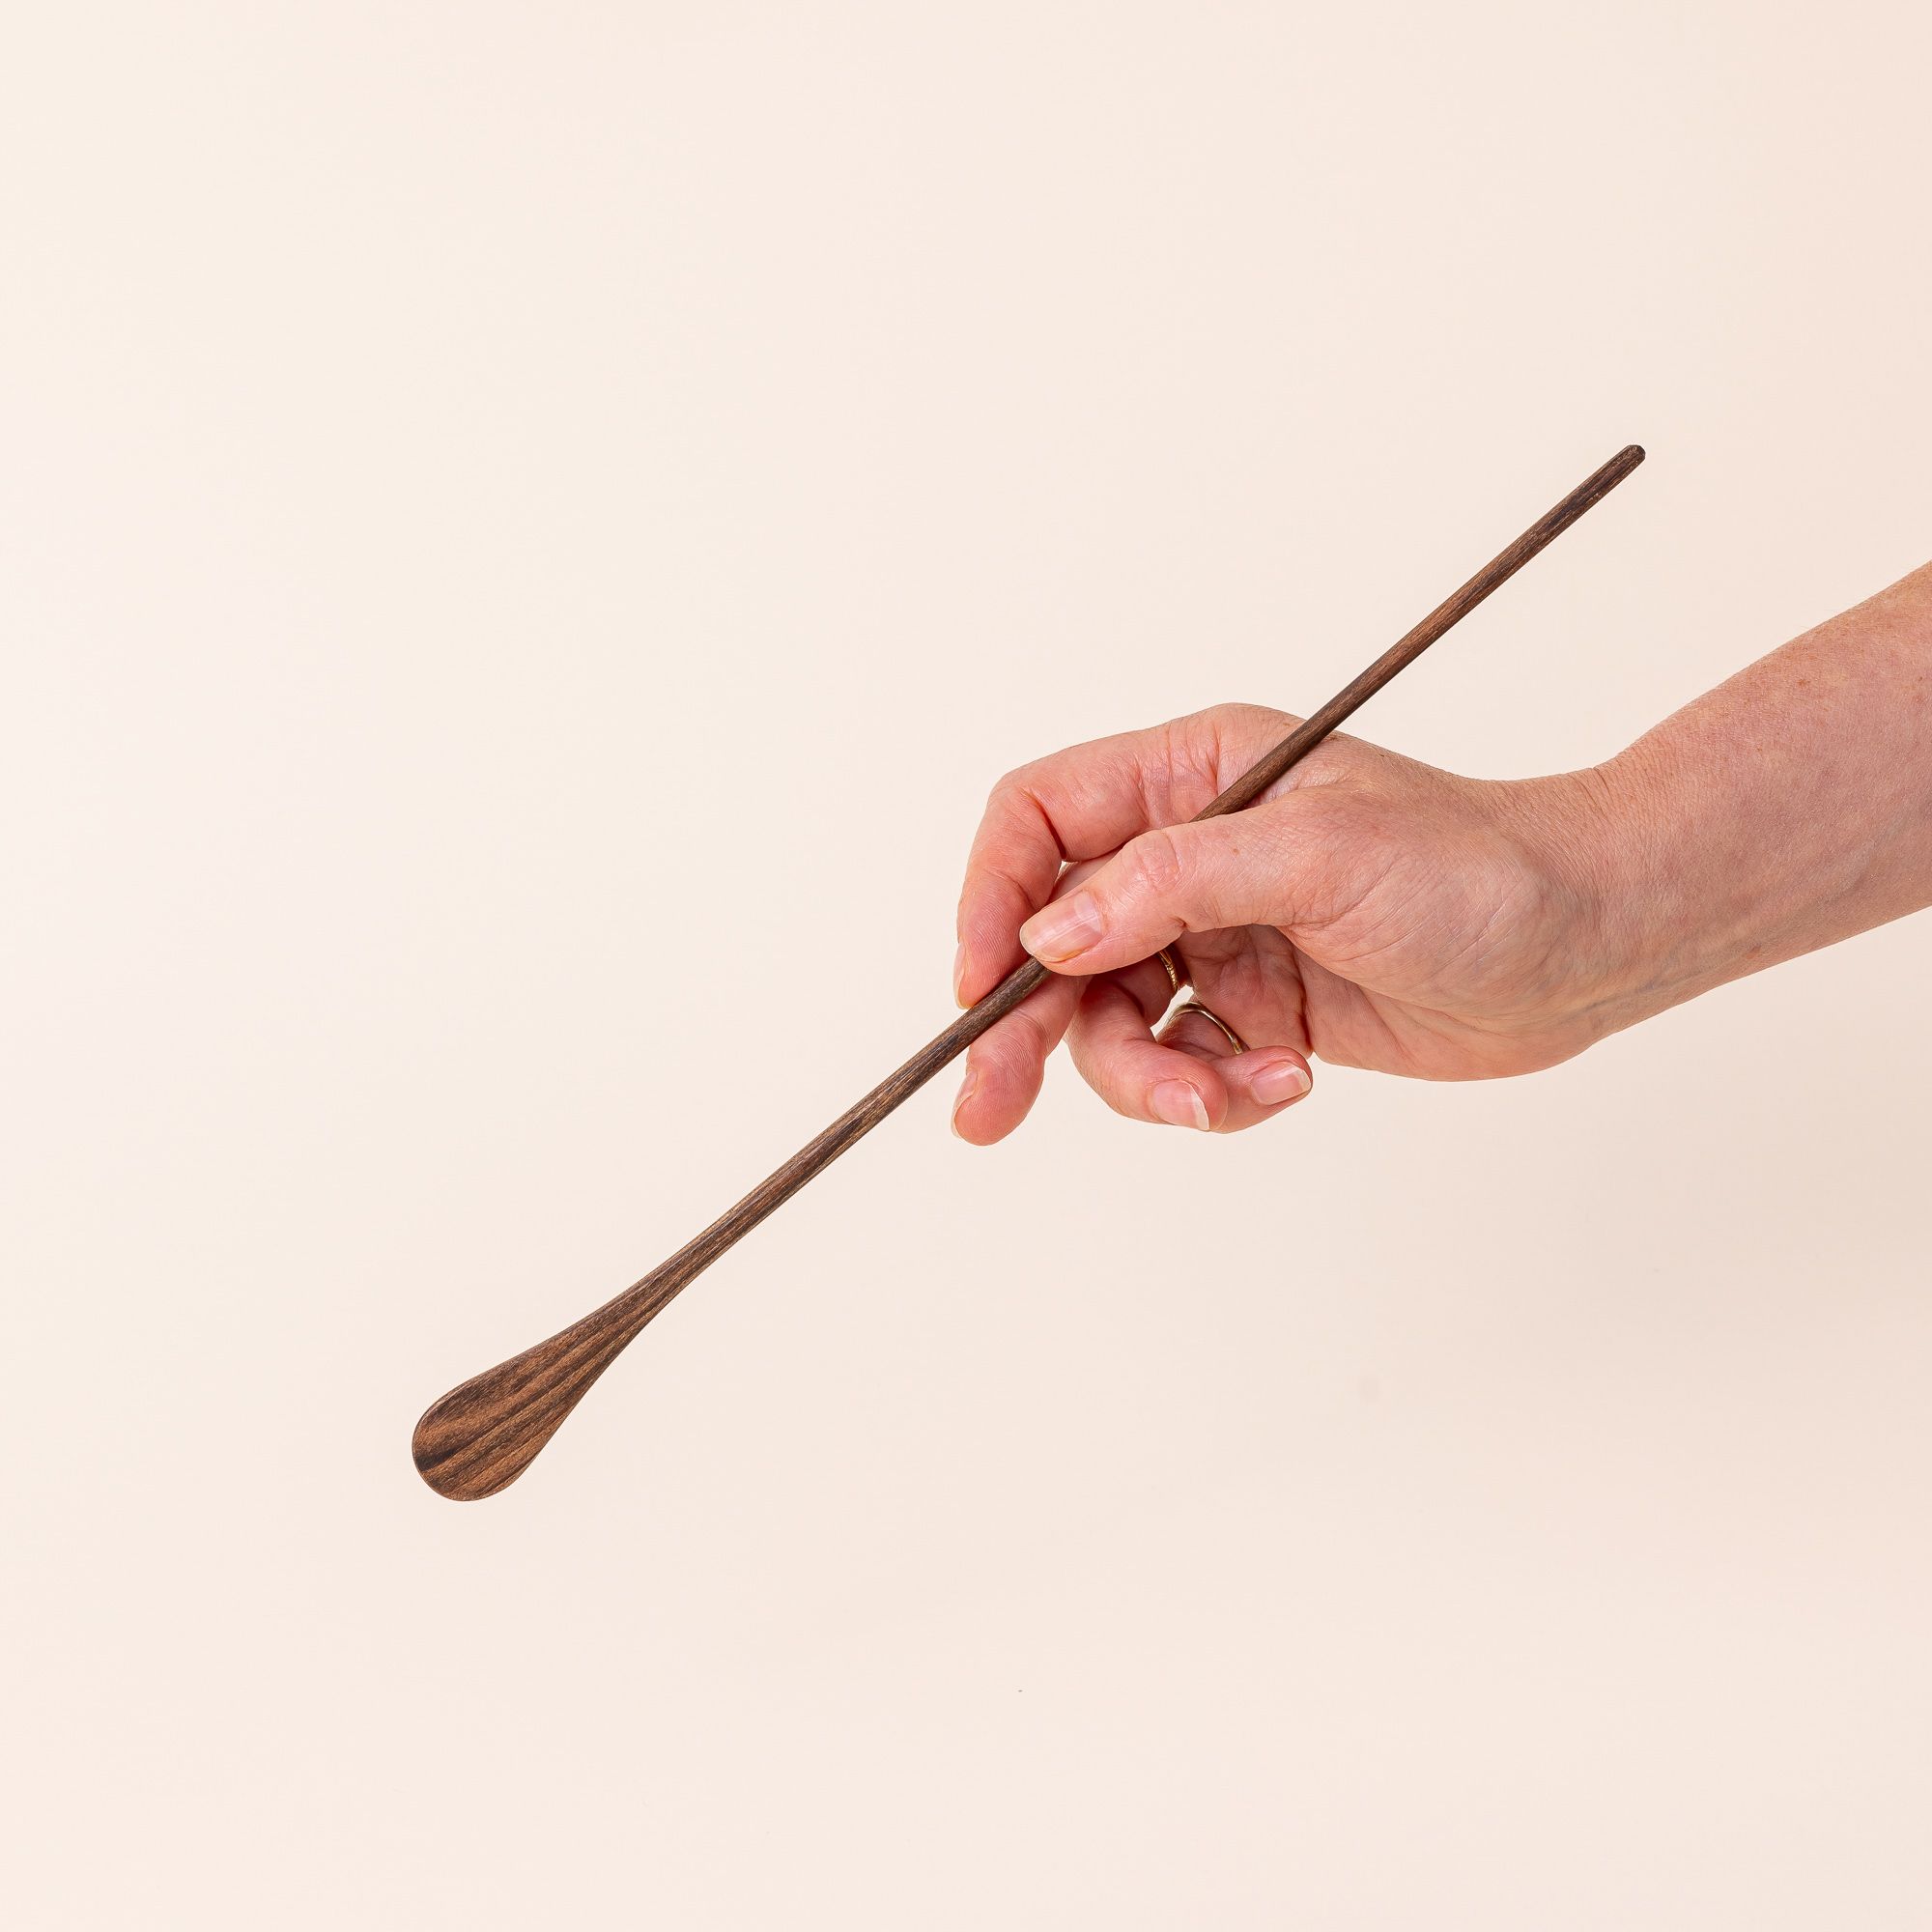 A hand holds a long thin walnut cocktail stirrer with a small spoon-like shape on the end